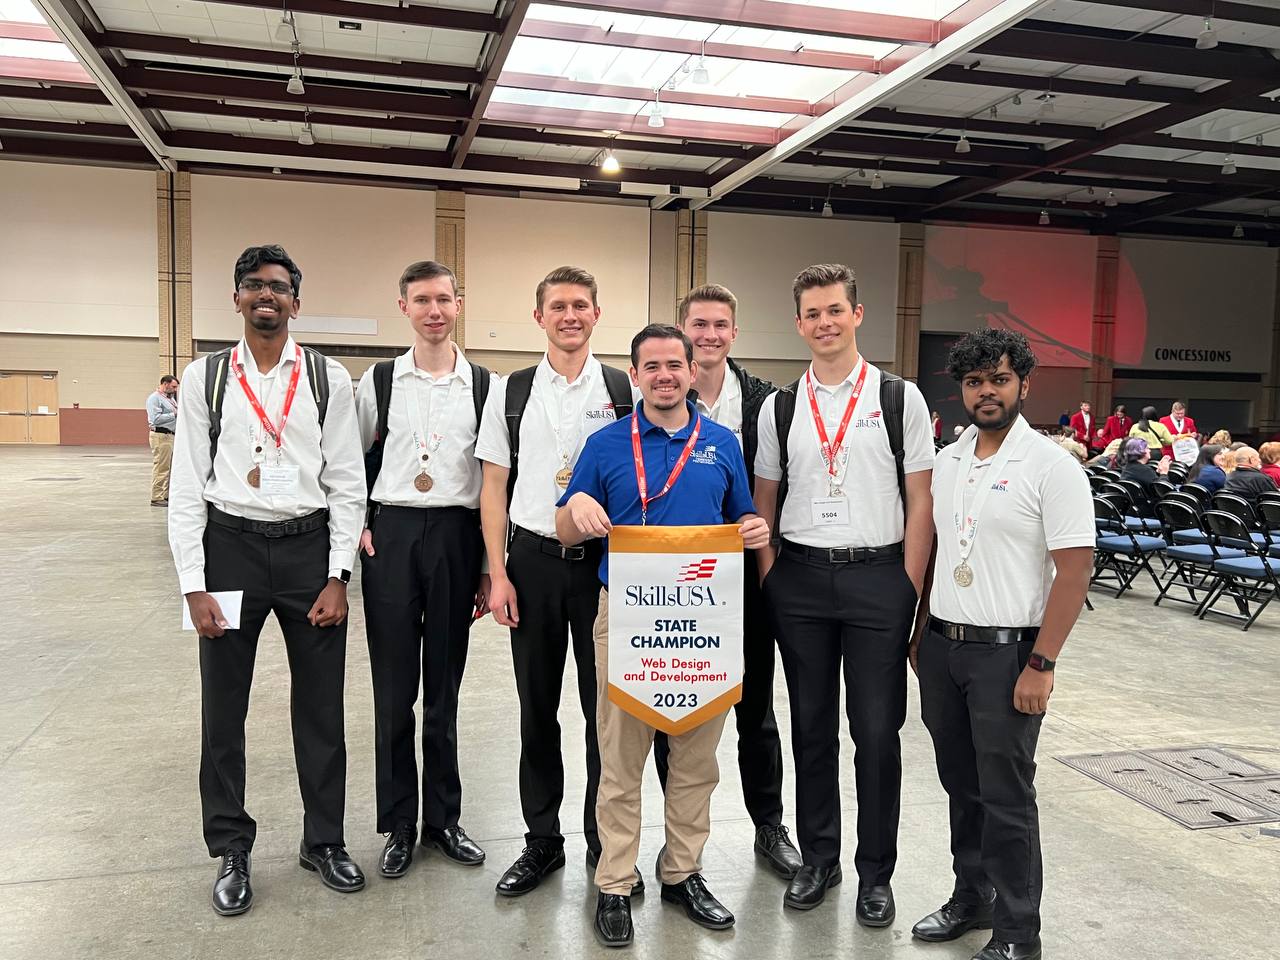 Abishur Moses (back left), Sam Tooley, Brandon and Allen Gustrowsky, Caeden Scott,                                     and Daryl Illangovan—all computer science majors at Southern Adventist University—swept                                     the podium as two-man teams at the state level for SkillsUSA Web Design and Development.                                     Southern alum and graduate student Dakota Cookenmaster (front), adjunct instructor at the university, coached the teams.